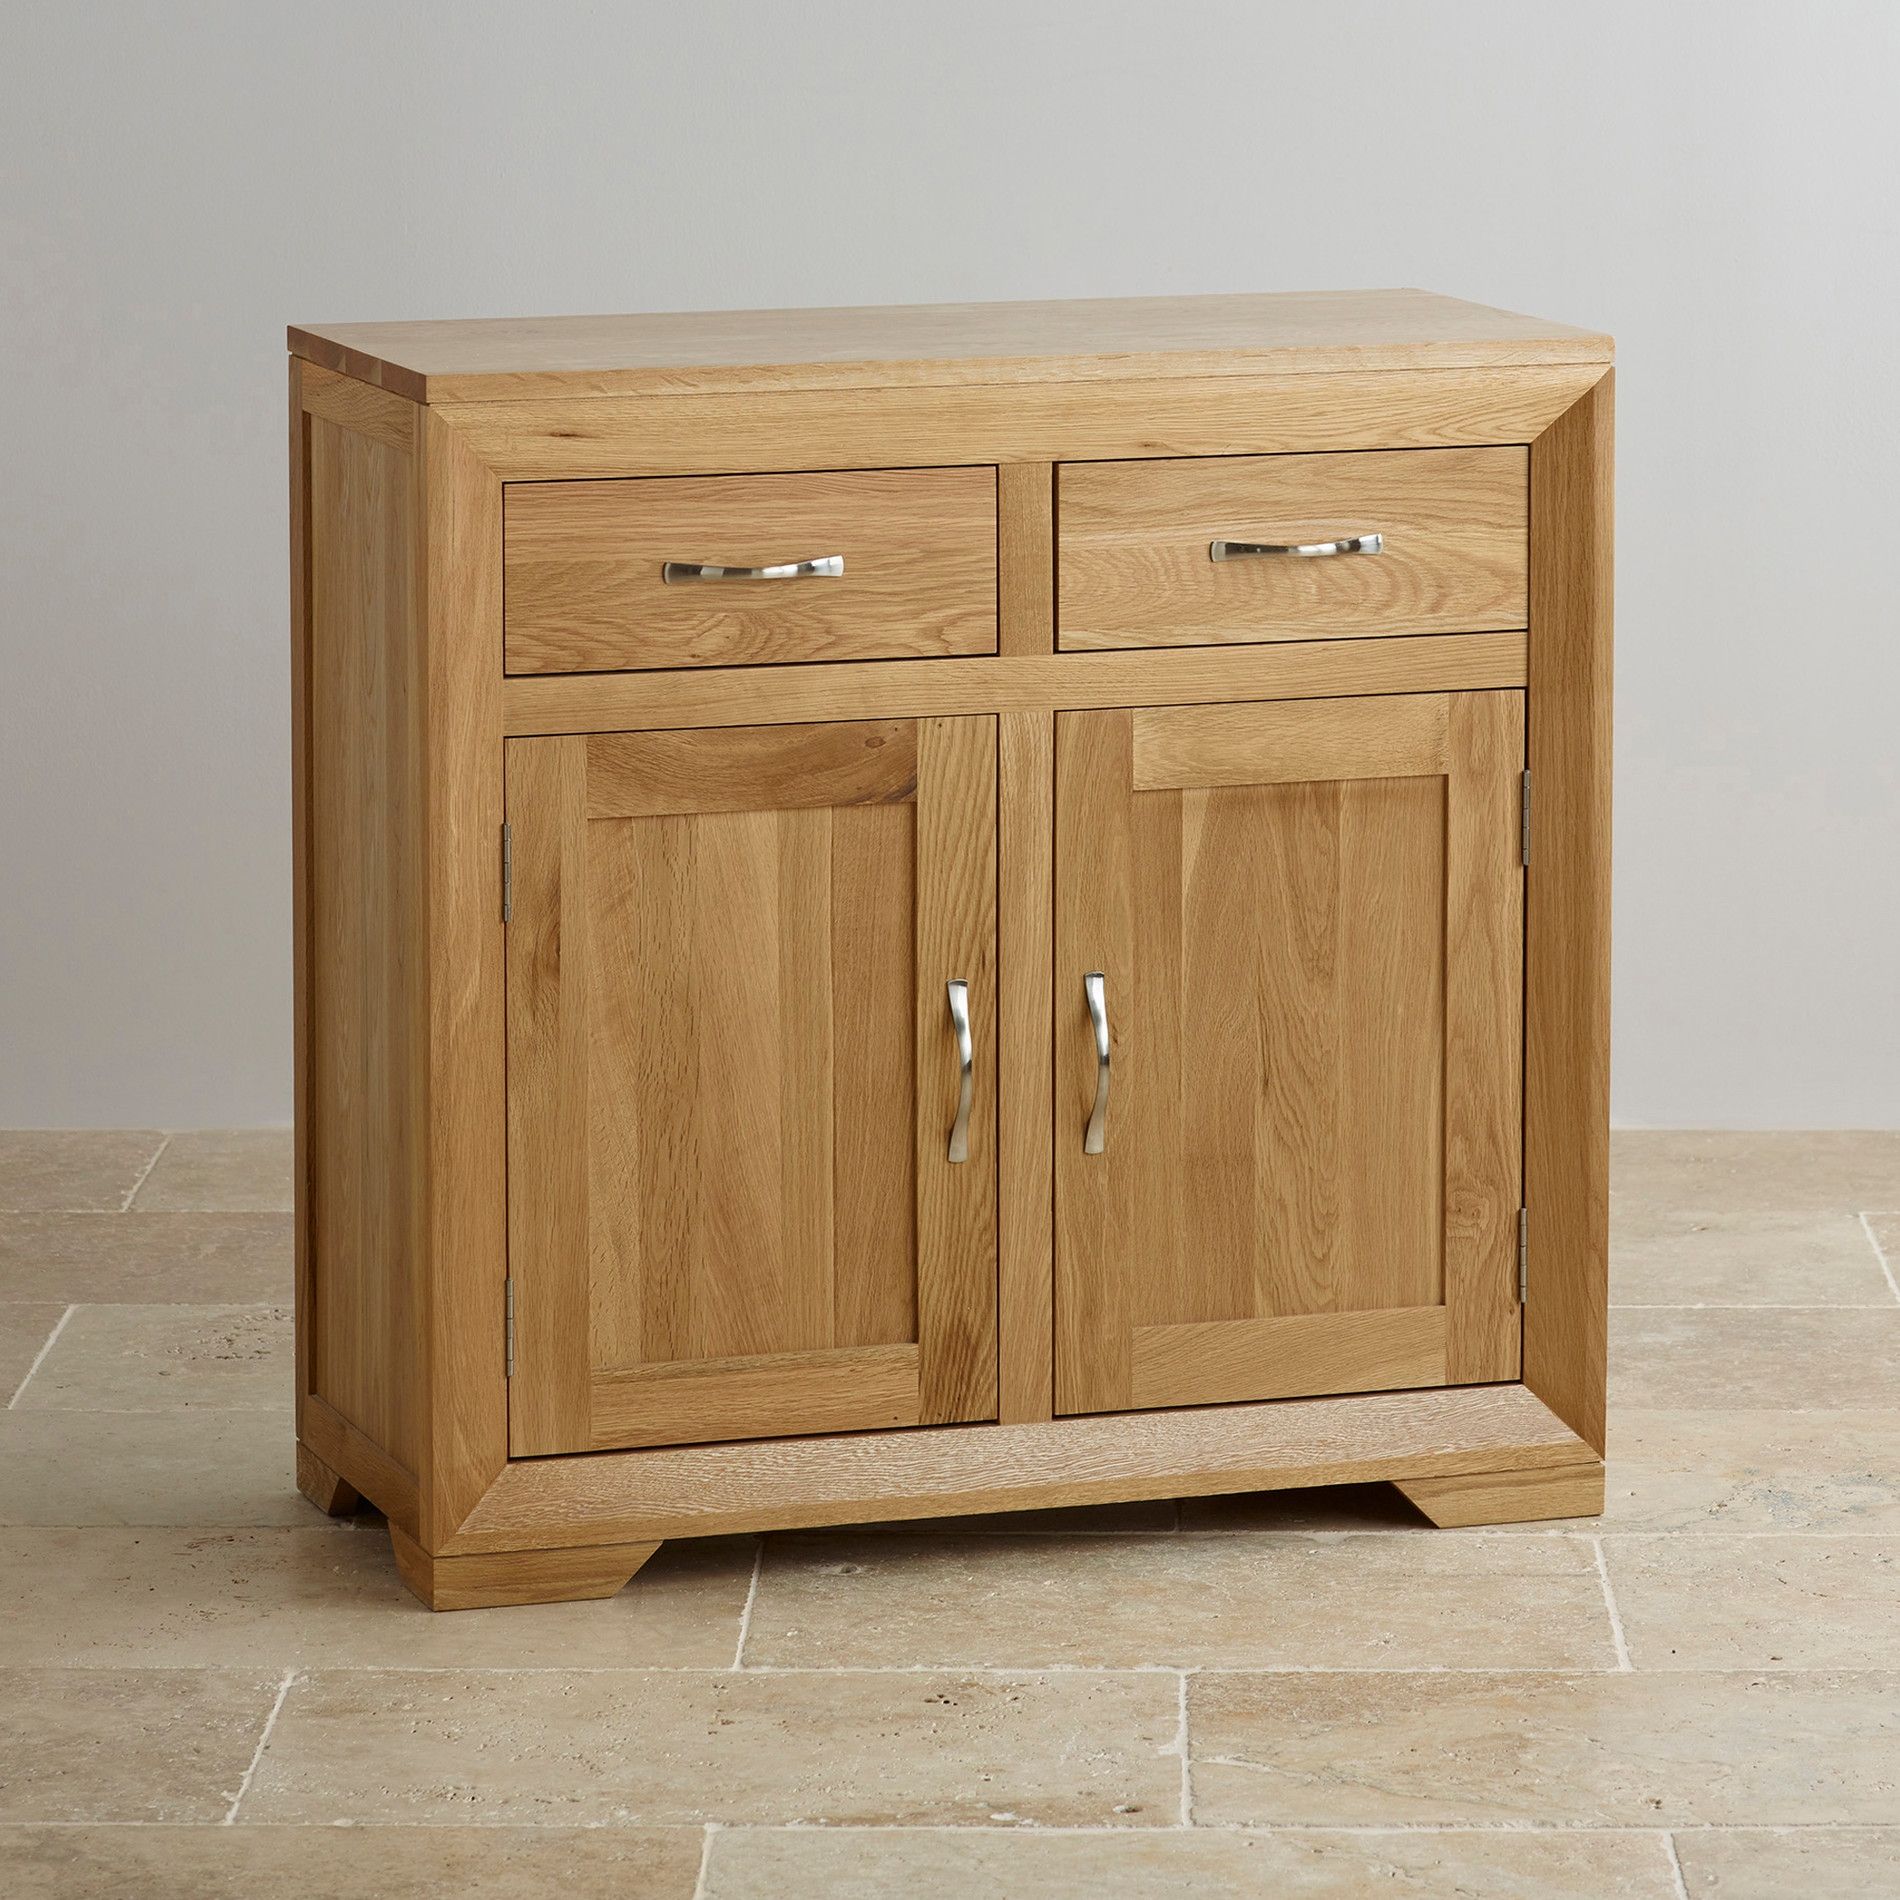 Small Oak Buffet Cabinet Creative Cabinets Decoration Pertaining To Small Oak Cupboard (View 5 of 15)